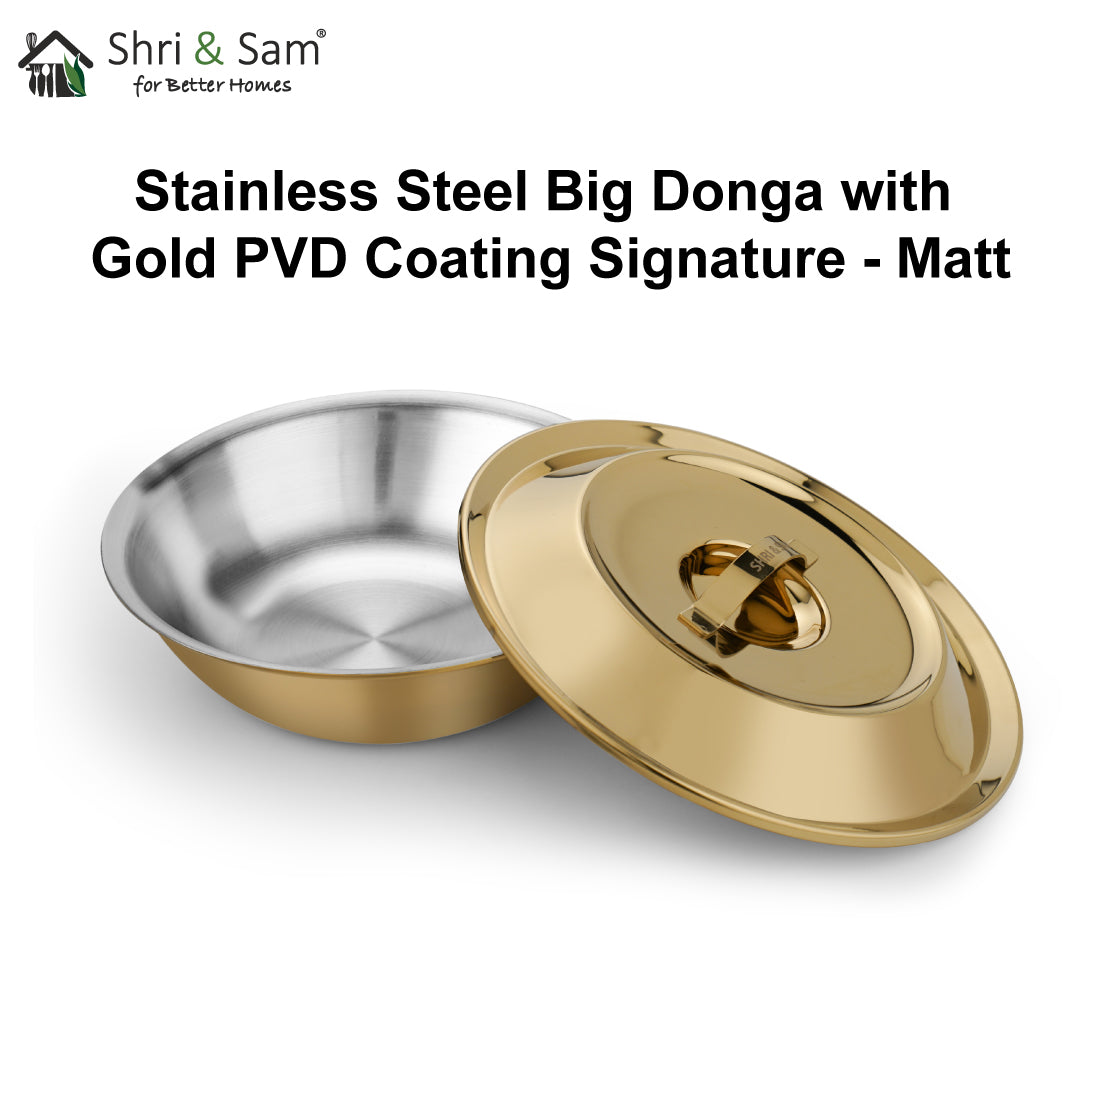 Stainless Steel Big Donga with Gold PVD Coating Signature - Matt